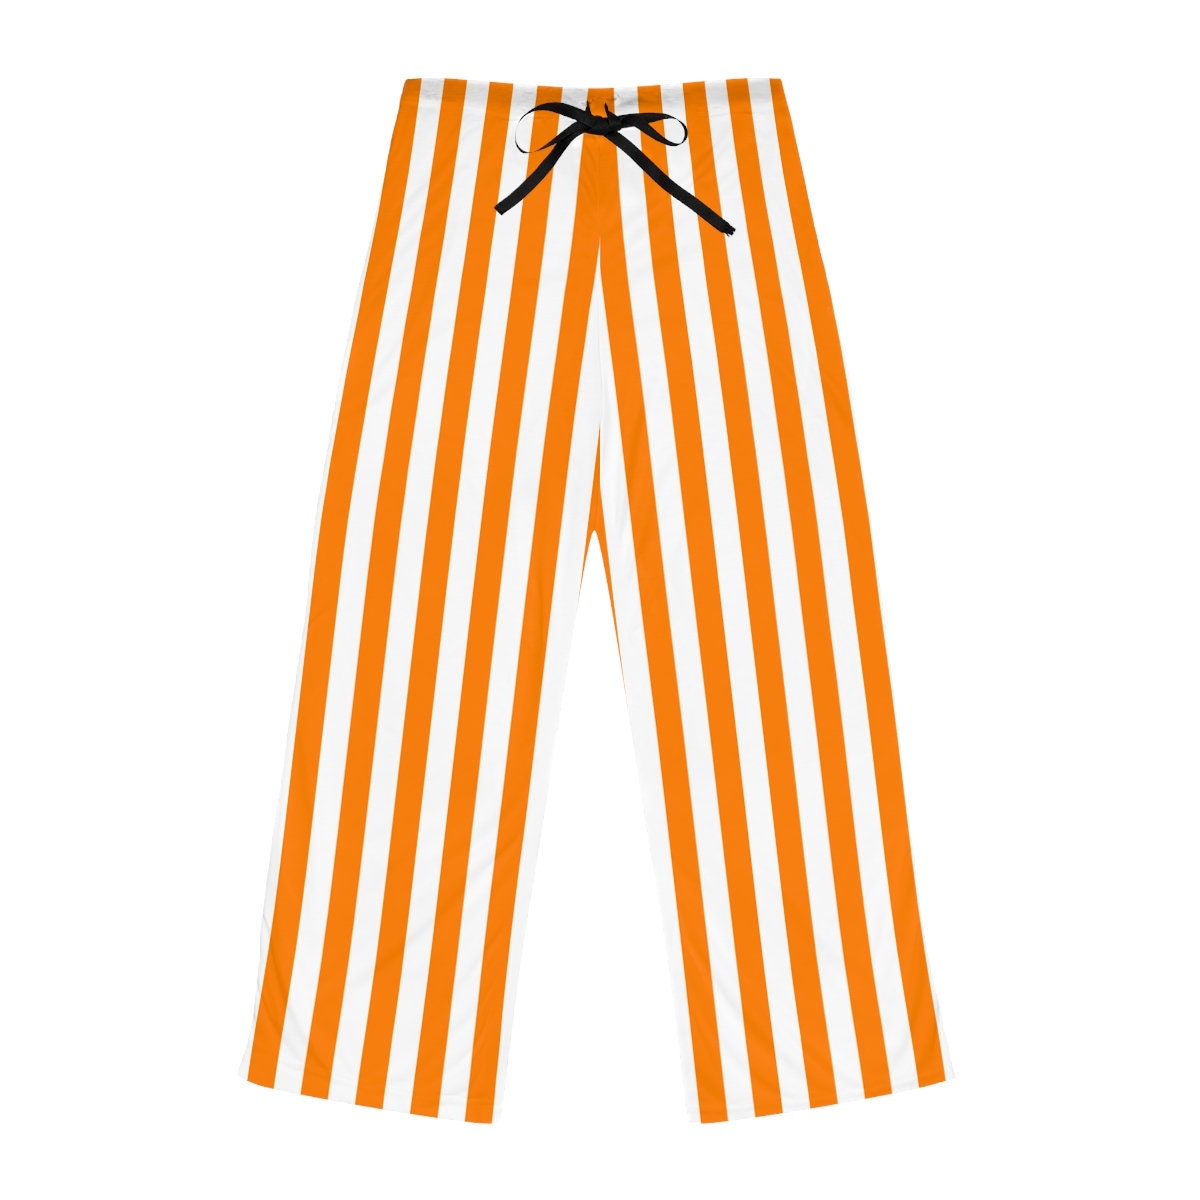 What's your opinion of the new white pants with orange stripes? IMO they  just don't look right. The absence of black stripes on top of the orange  make them feel wrong. I